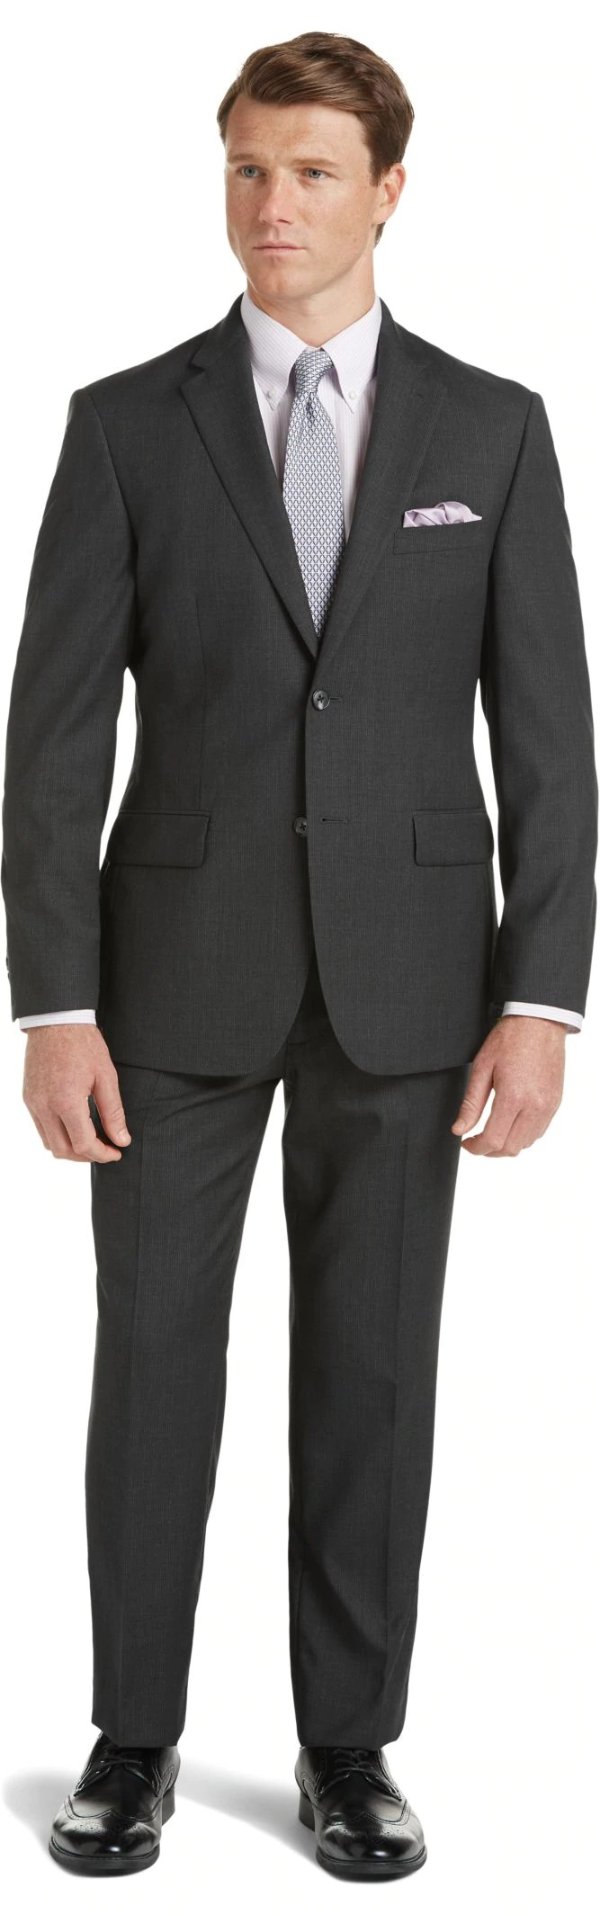 Traveler Collection Tailored Fit Stripe Suit CLEARANCE - All Clearance | Jos A Bank